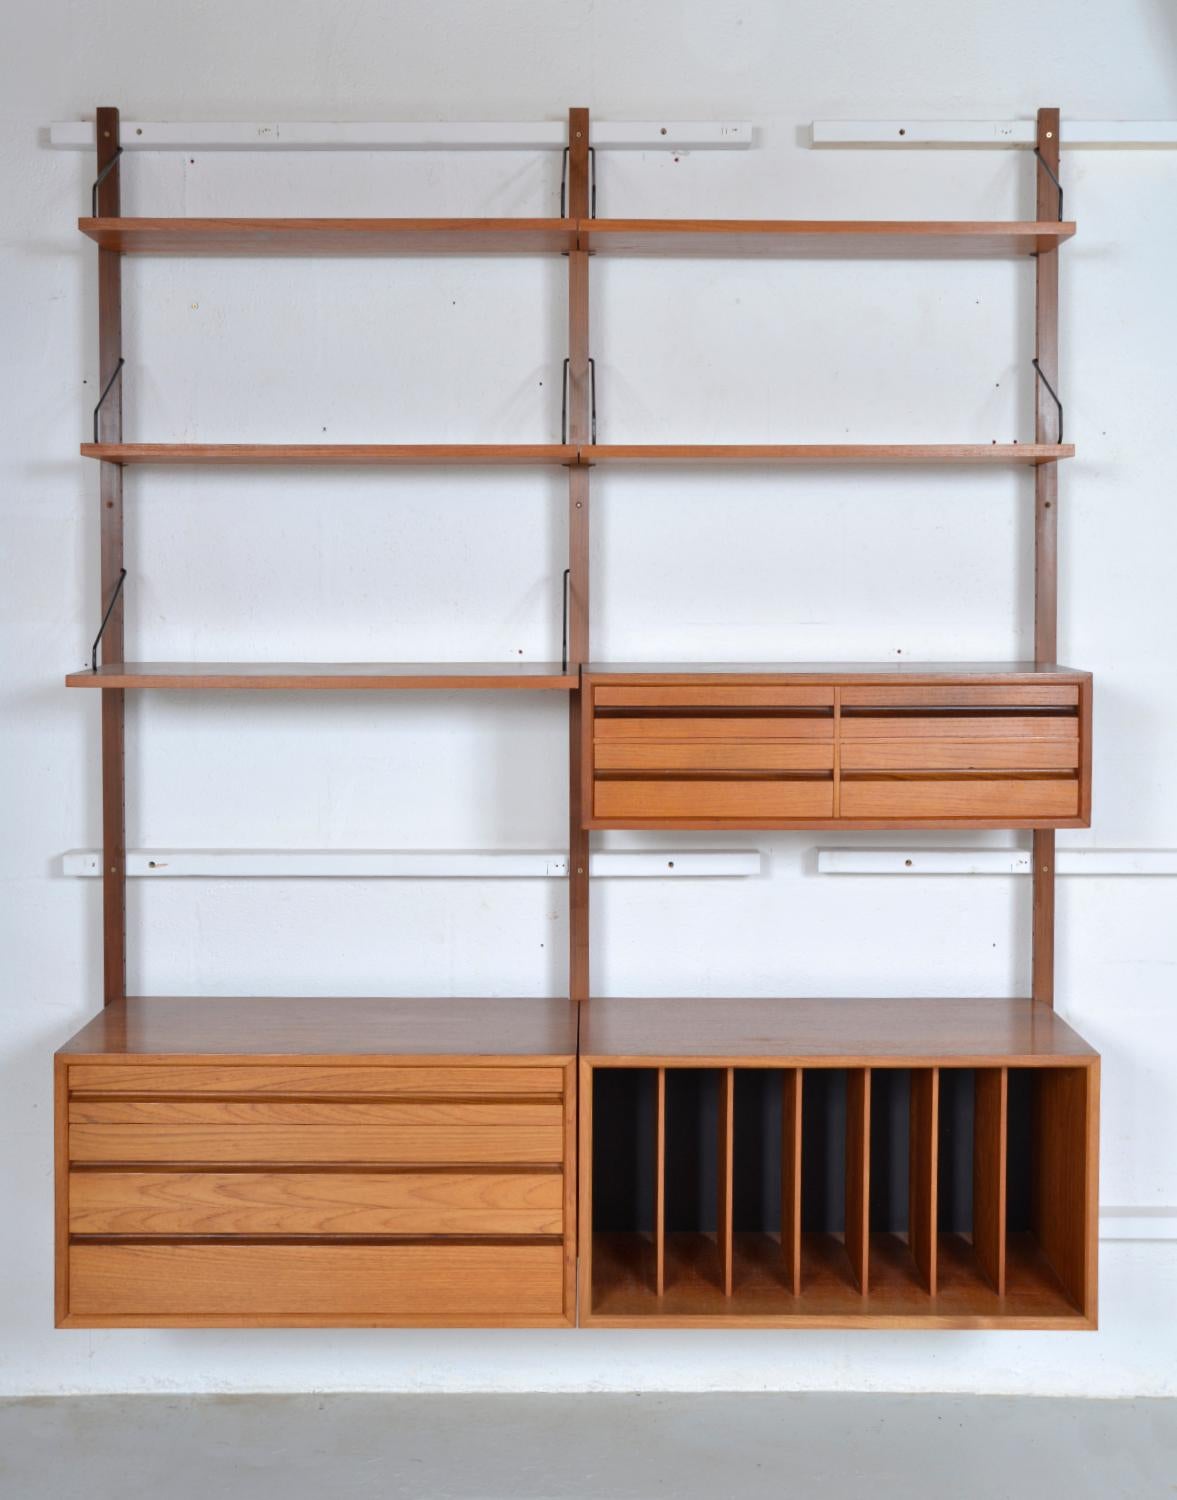 This highly versatile and functional “Royal System” was originally designed by Poul Cadovius in 1948. This useful two-bay teak shelving system has a very clean look and offers a wide variety of storage and display options. The set includes a chest